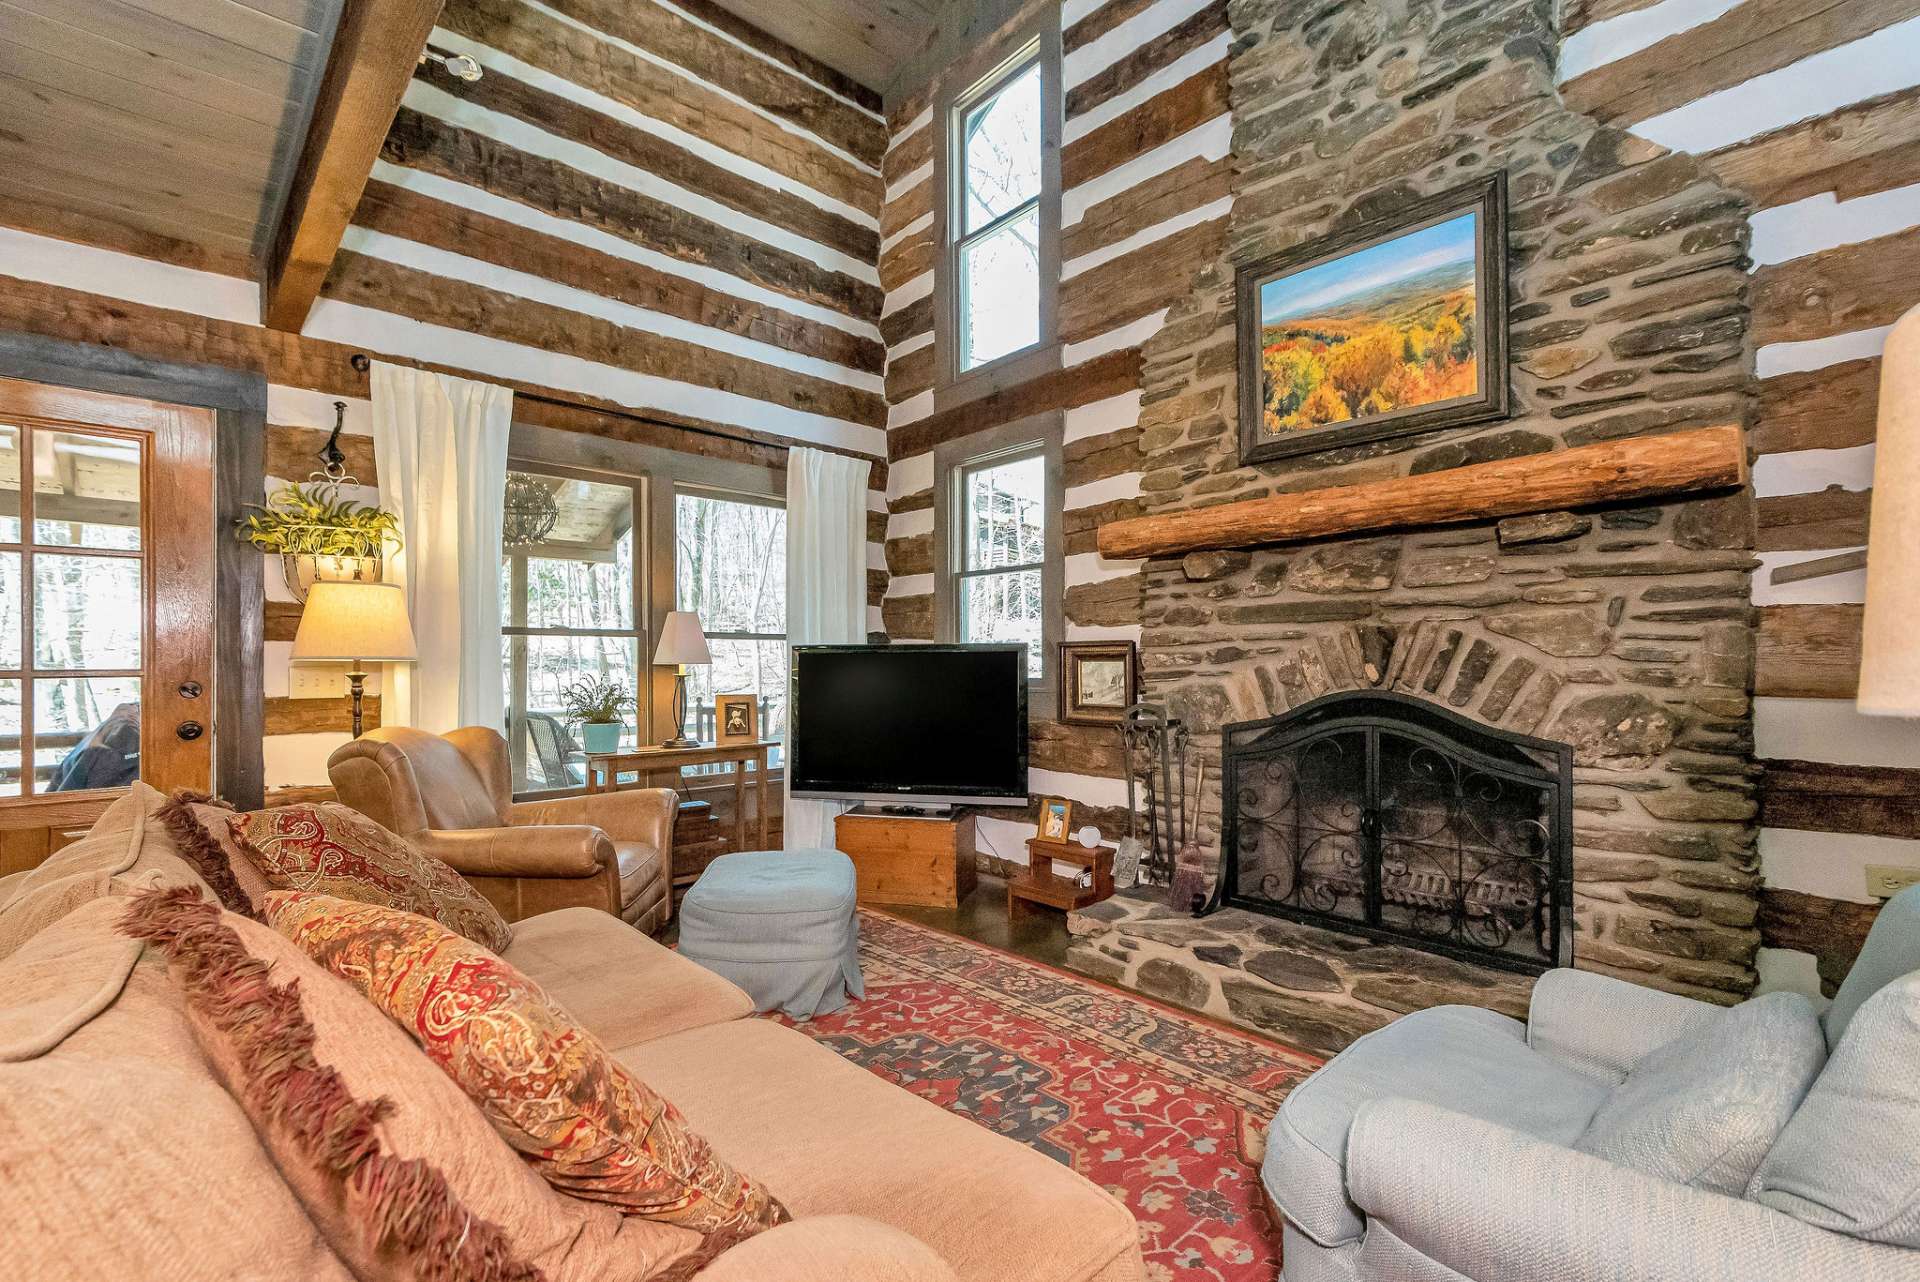 Step inside to discover an inviting open great room adorned with a floor-to-ceiling native stone fireplace.